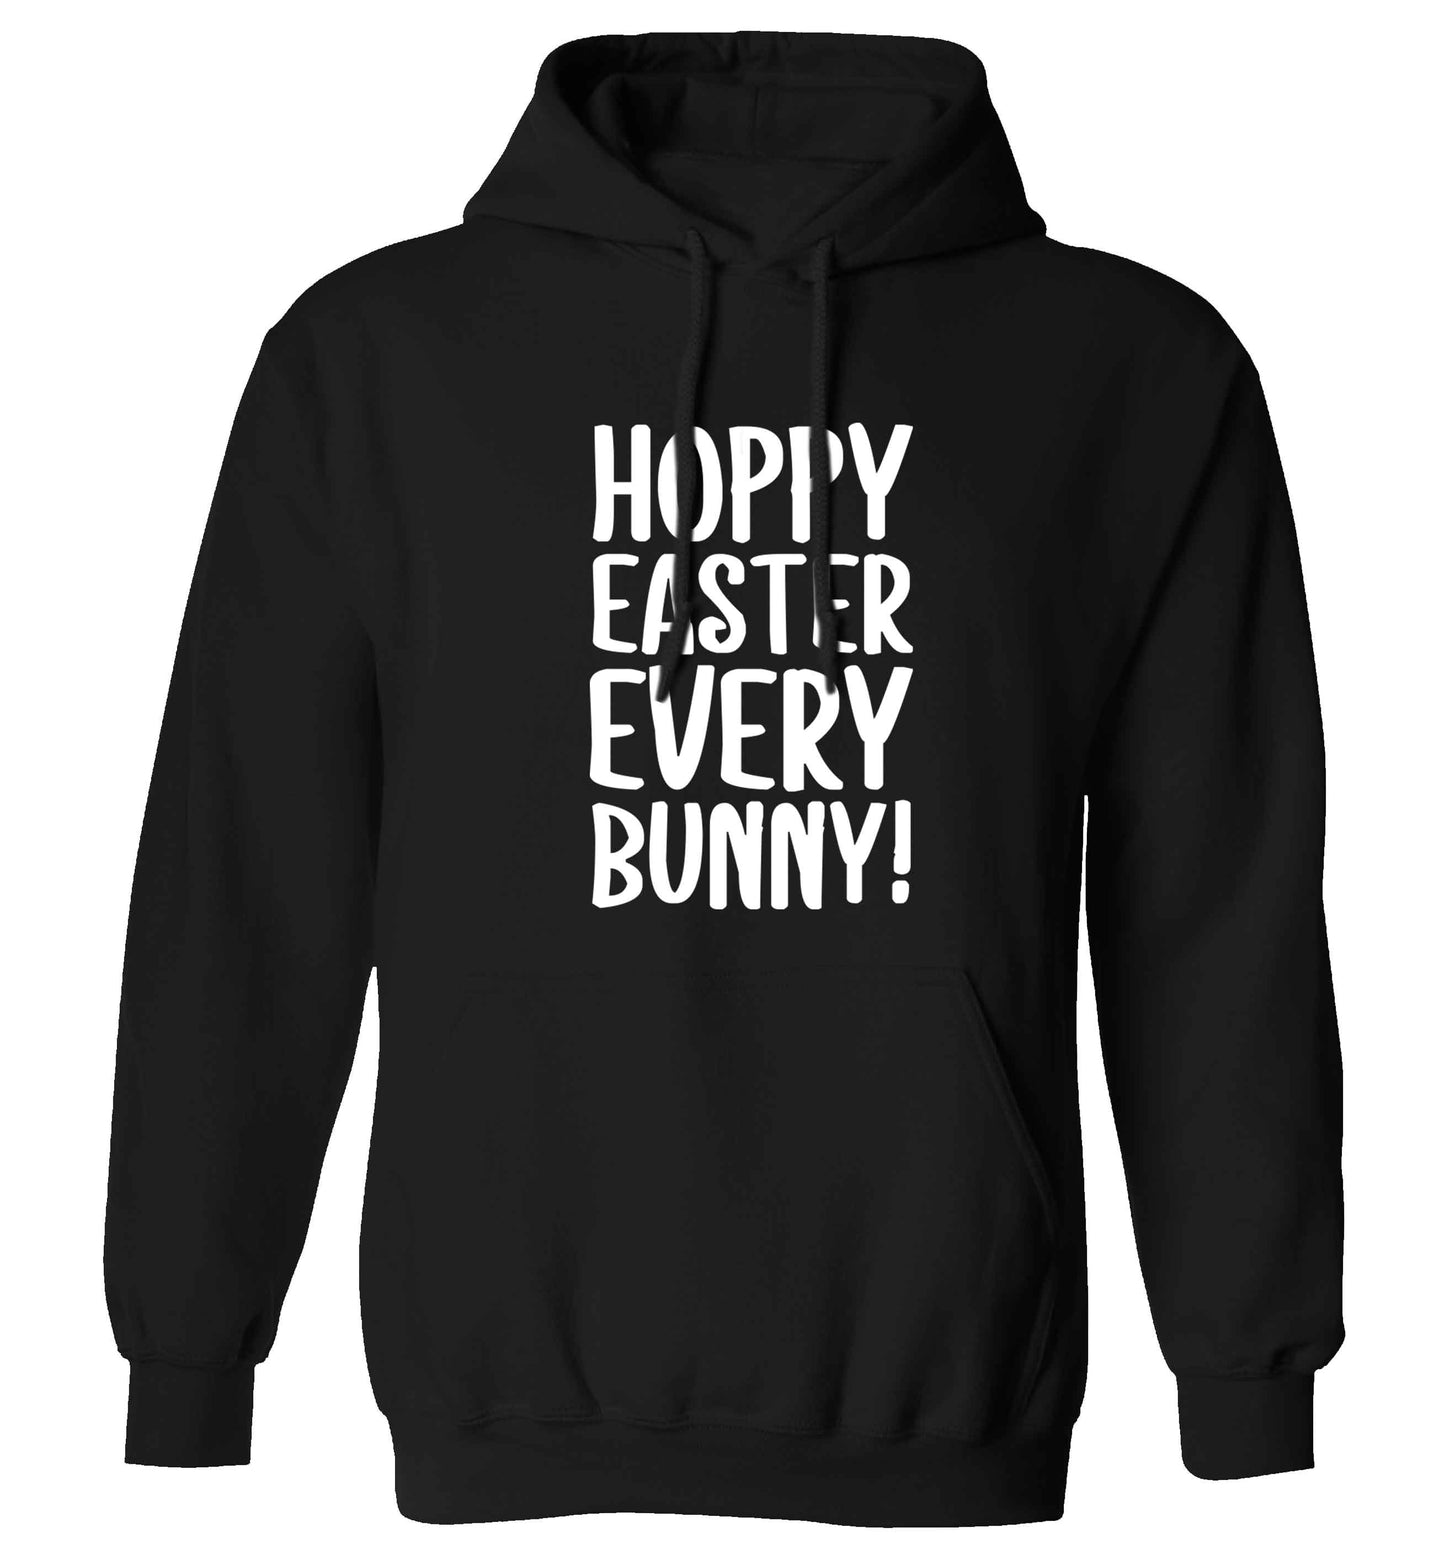 Hoppy Easter every bunny! adults unisex black hoodie 2XL